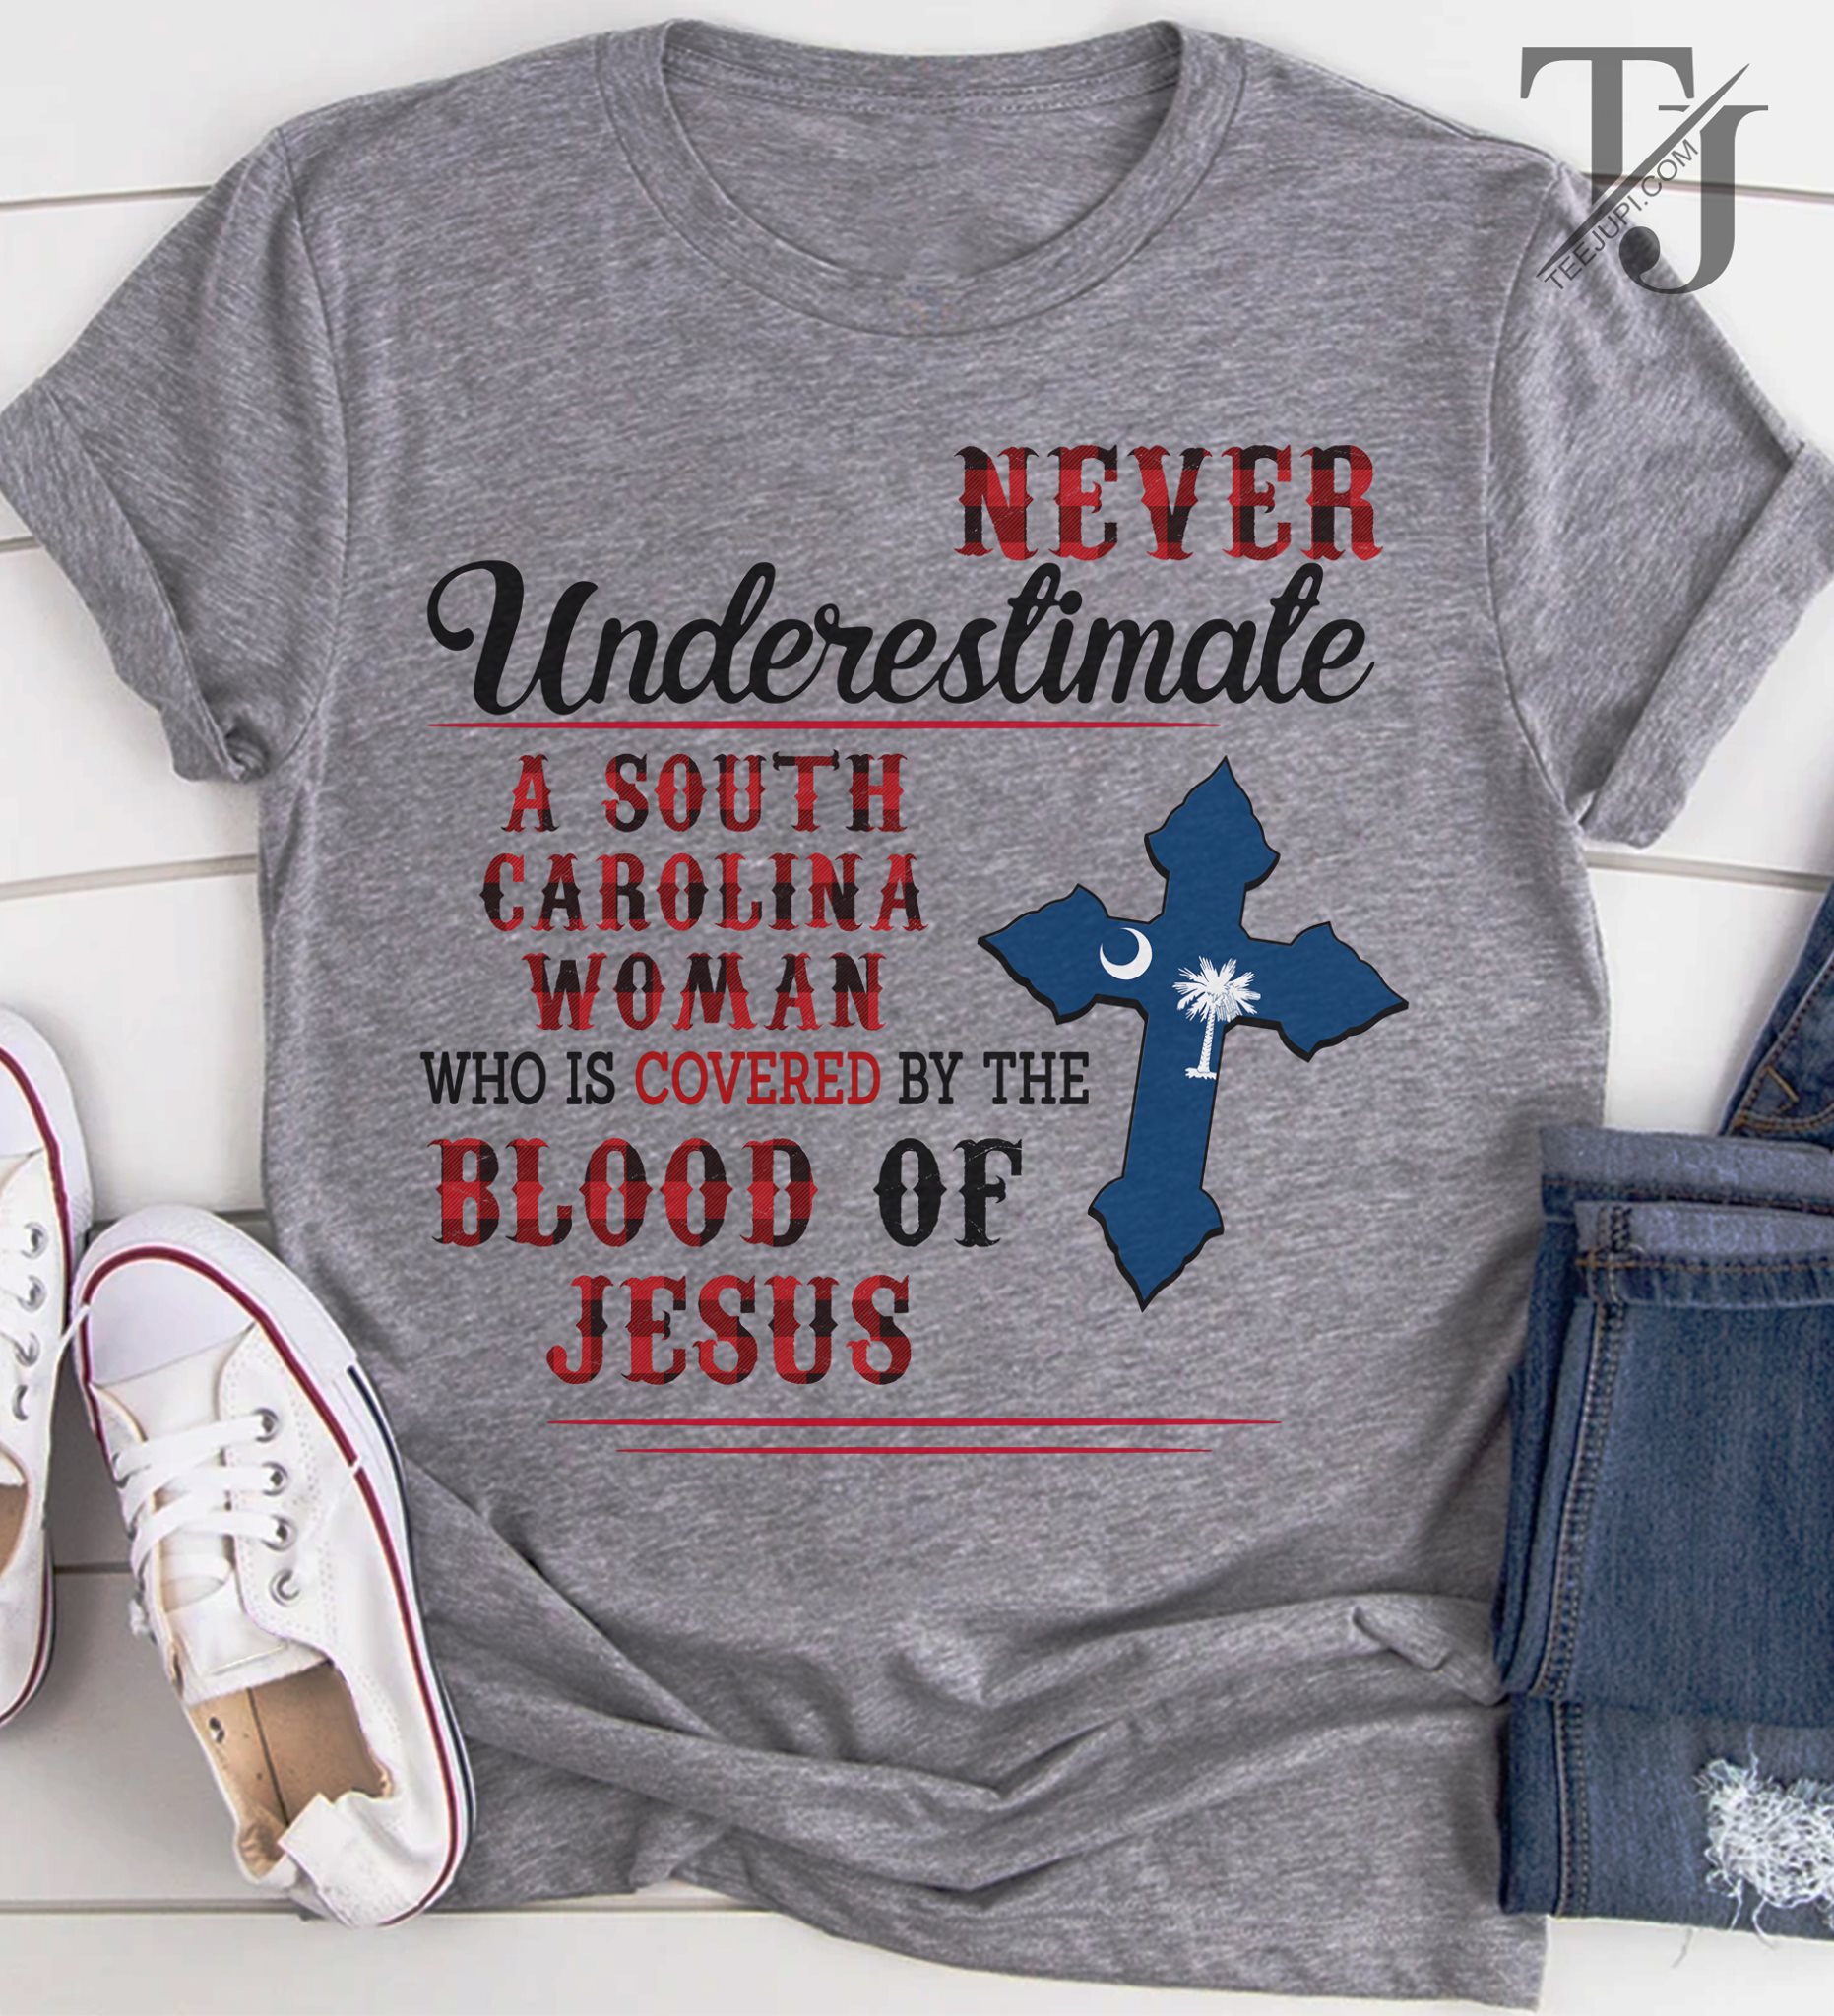 Never underestimate a South Carolina woman who is covered by the Blood of Jesus